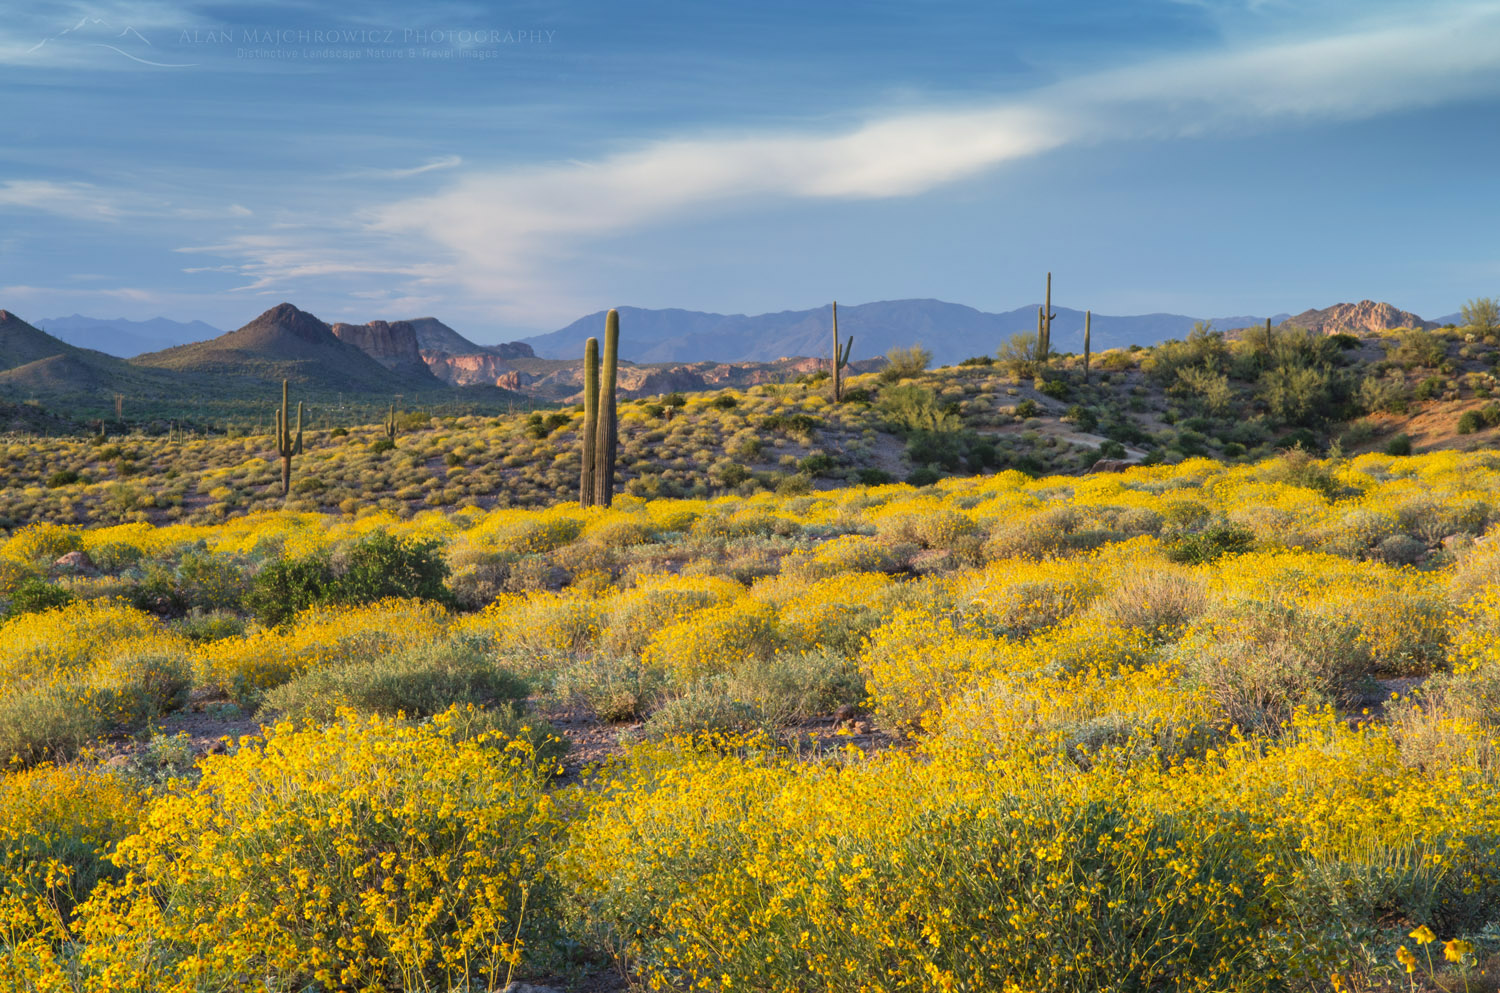 Evening over the Sonoran Desert and Superstition Mountains Arizona, yellow Brittlebush (Encelia farinosa) blooming in the foreground #56952